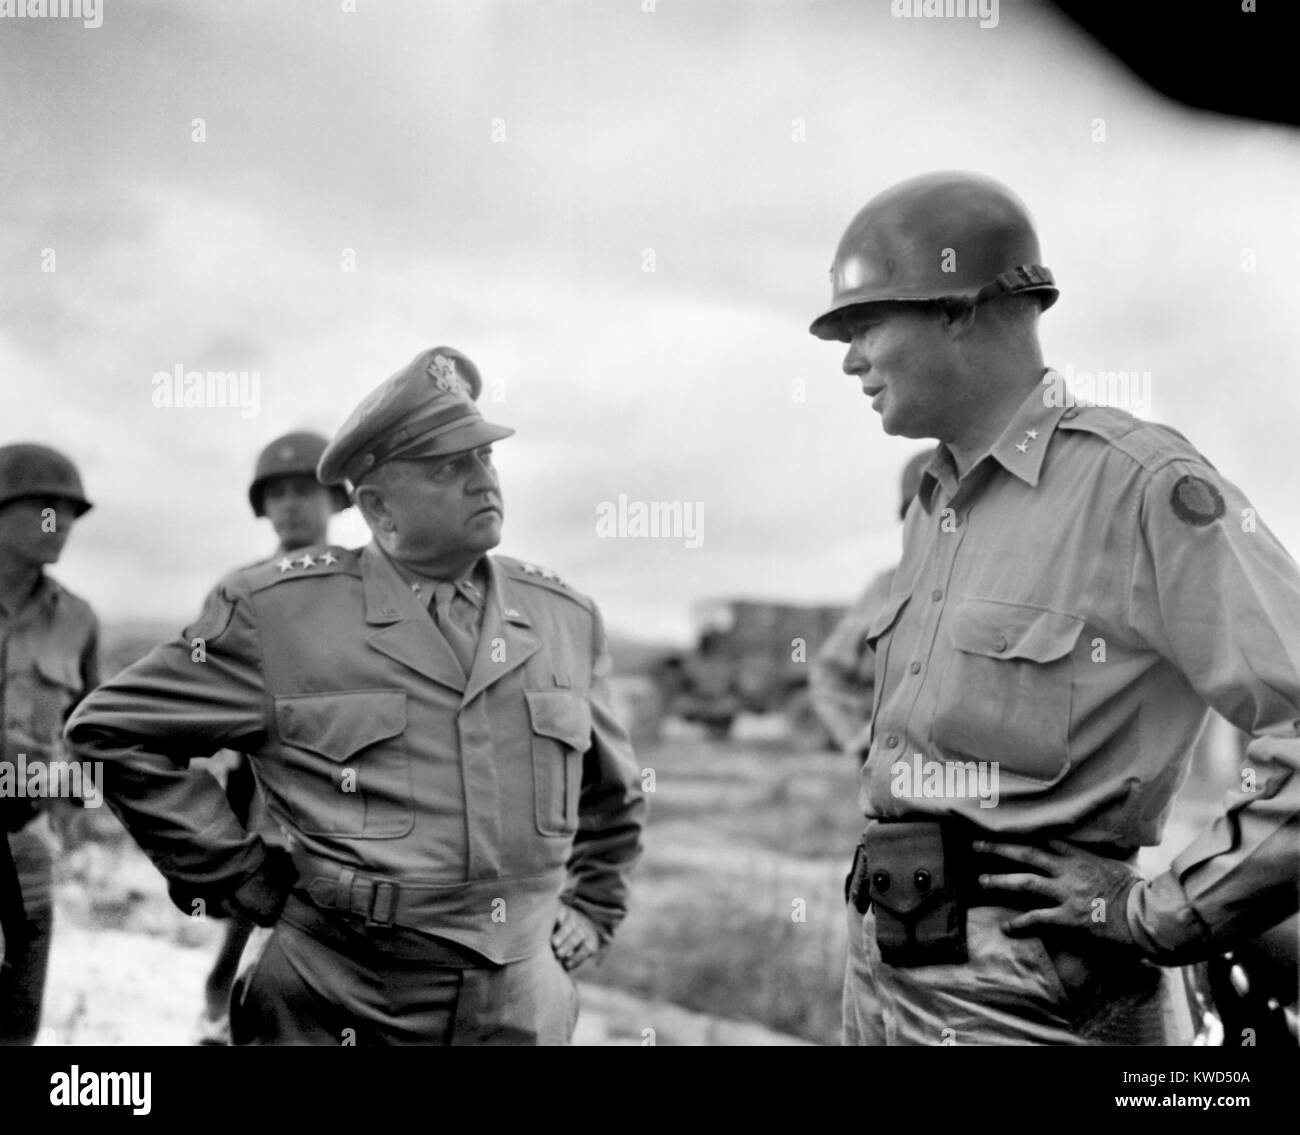 General Walton Walker (left), Commander of the 8th U.S. Army in July 1950. His Japanese based army quickly established a foothold in South East Korean to counter the North Korean invasion. On right is Major General William Dean, U.S. Commander of Ground Forces in Korea. Dean was captured by the North Koreans later in July. Korean War, 1950-53. (BSLOC 2014 11 143) Stock Photo